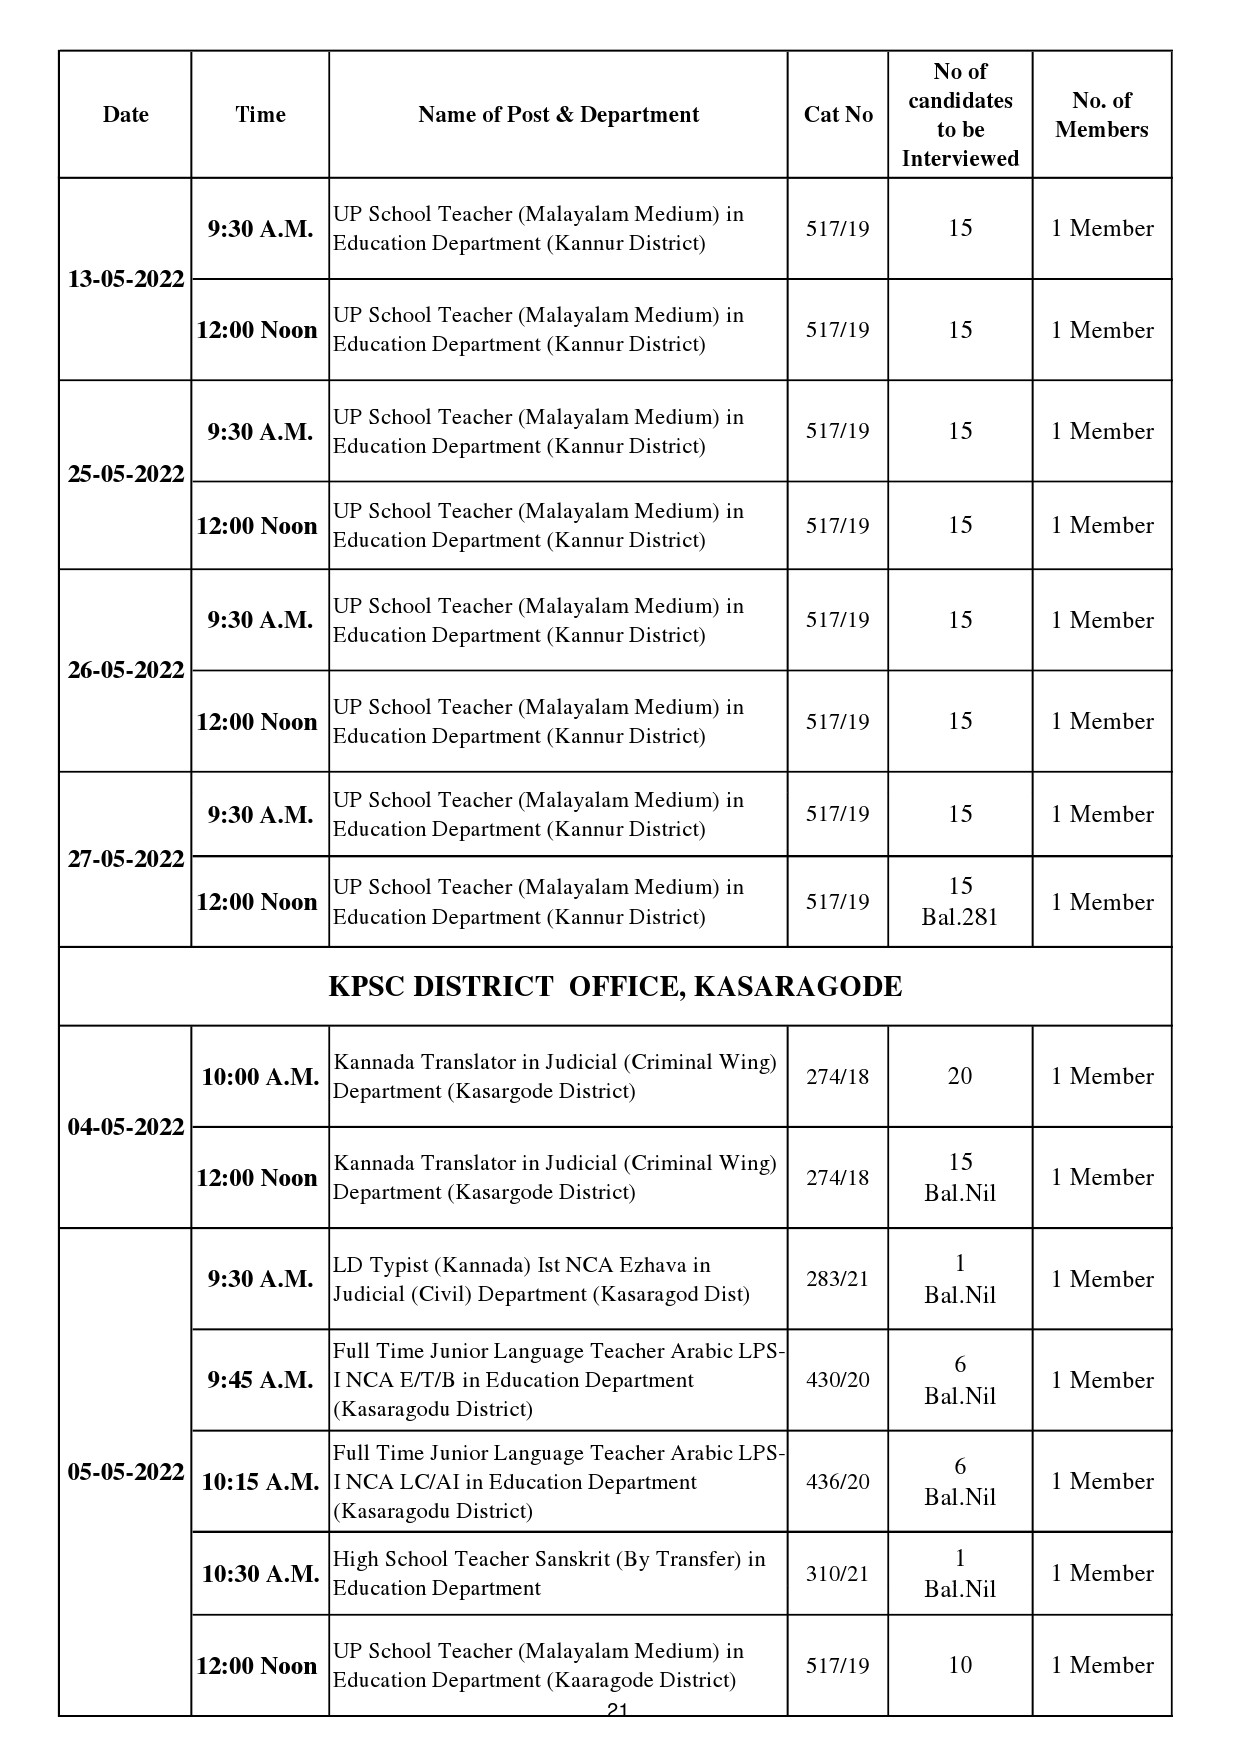 KPSC INTERVIEW PROGRAMME FOR THE MONTH OF MAY 2022 - Notification Image 21